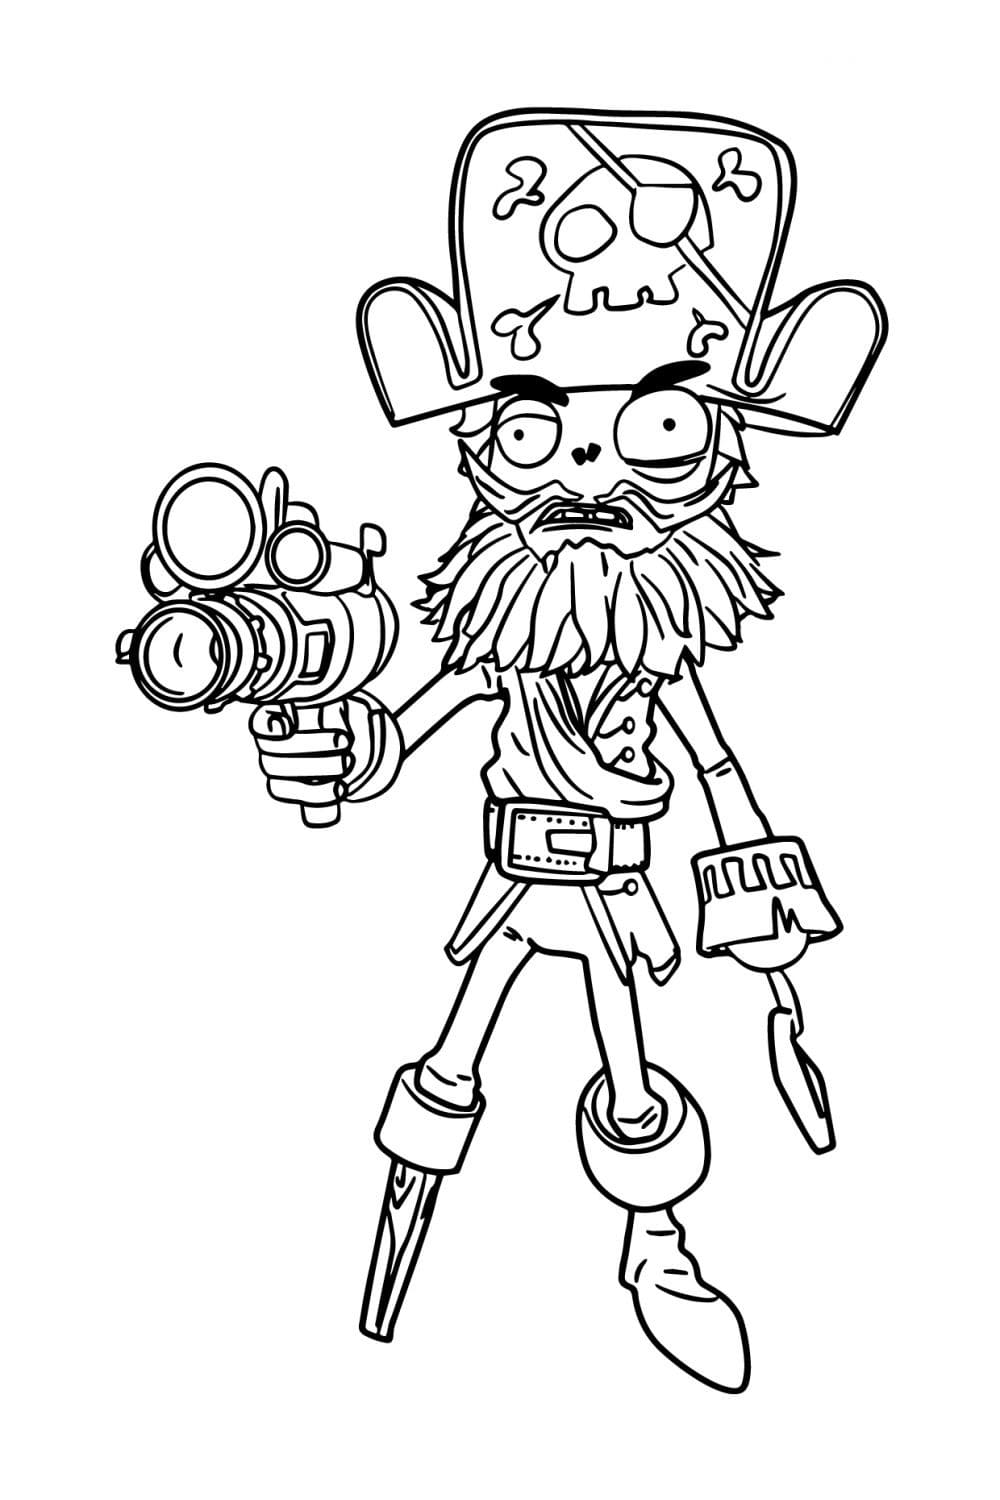 Coloring page Zombies A pirate with a gun